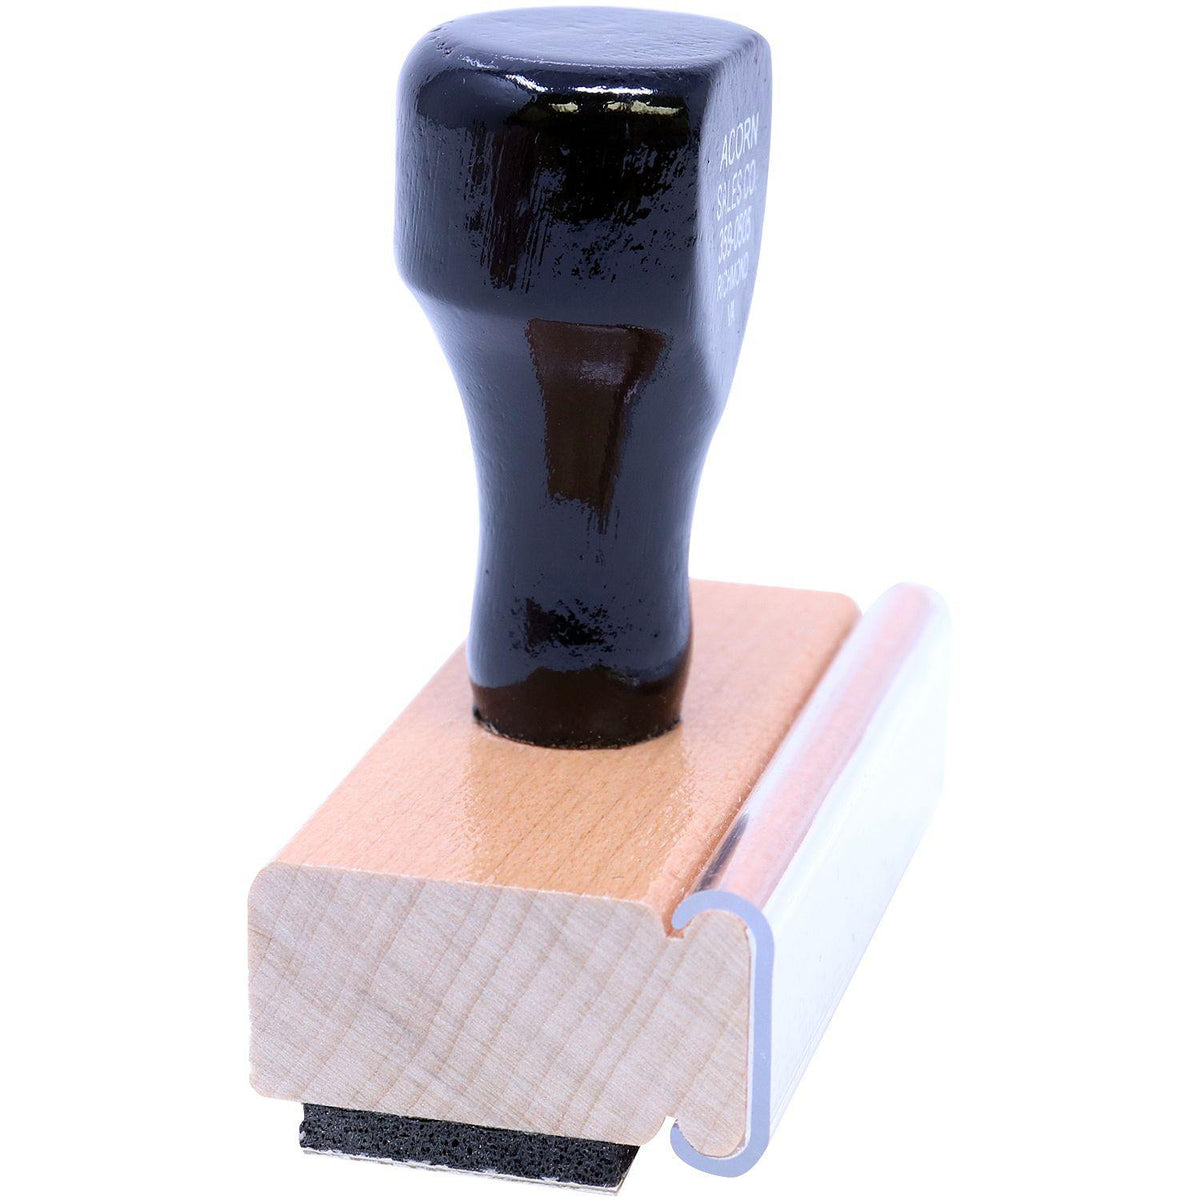 Side View of Large Exhibit Rubber Stamp at an Angle